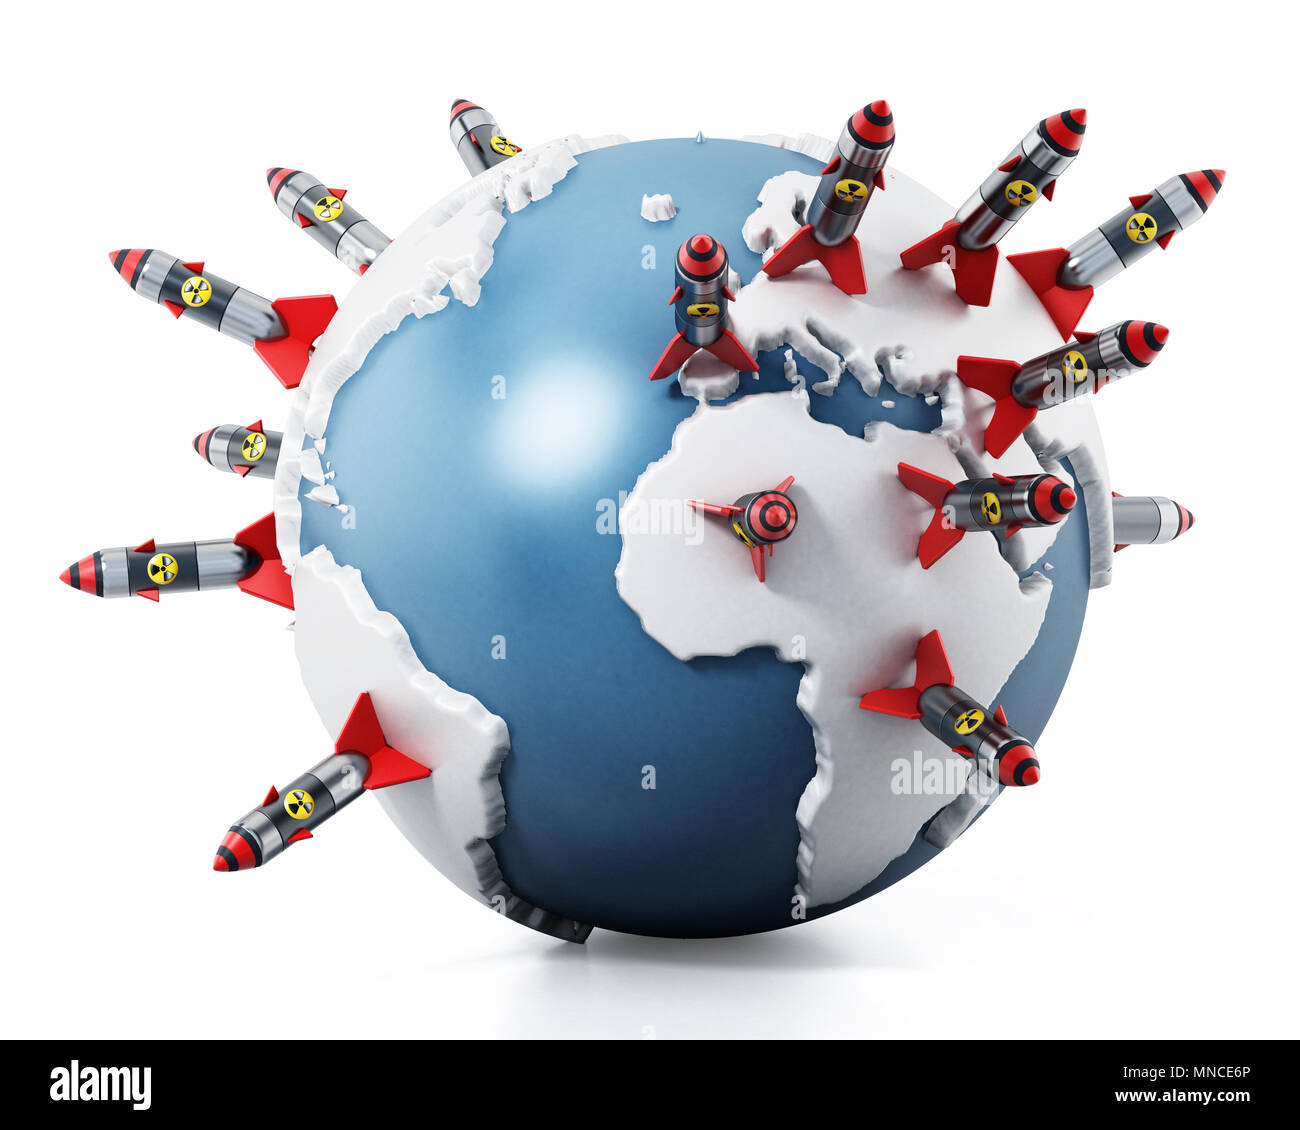 Nuclear missiles standing on world map. 3D illustration. Stock Photo